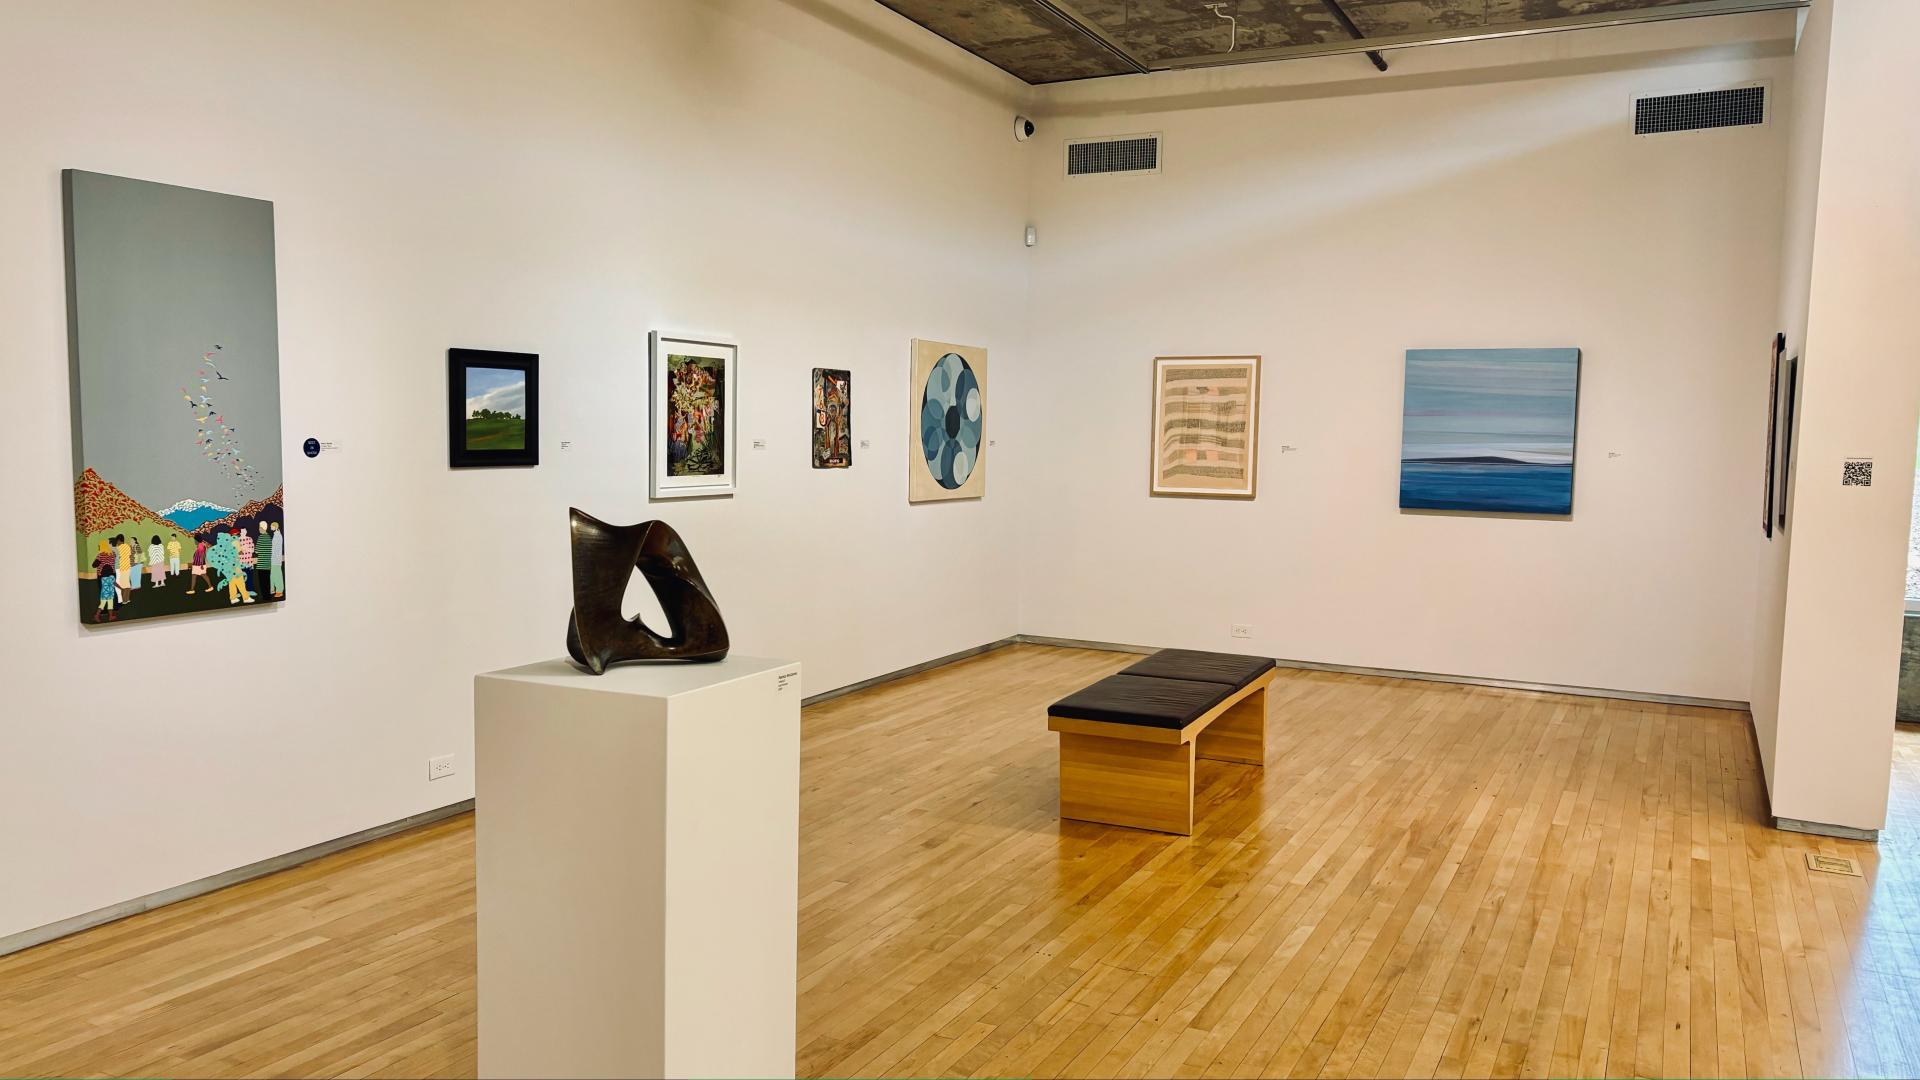 Image of gallery with artworks.